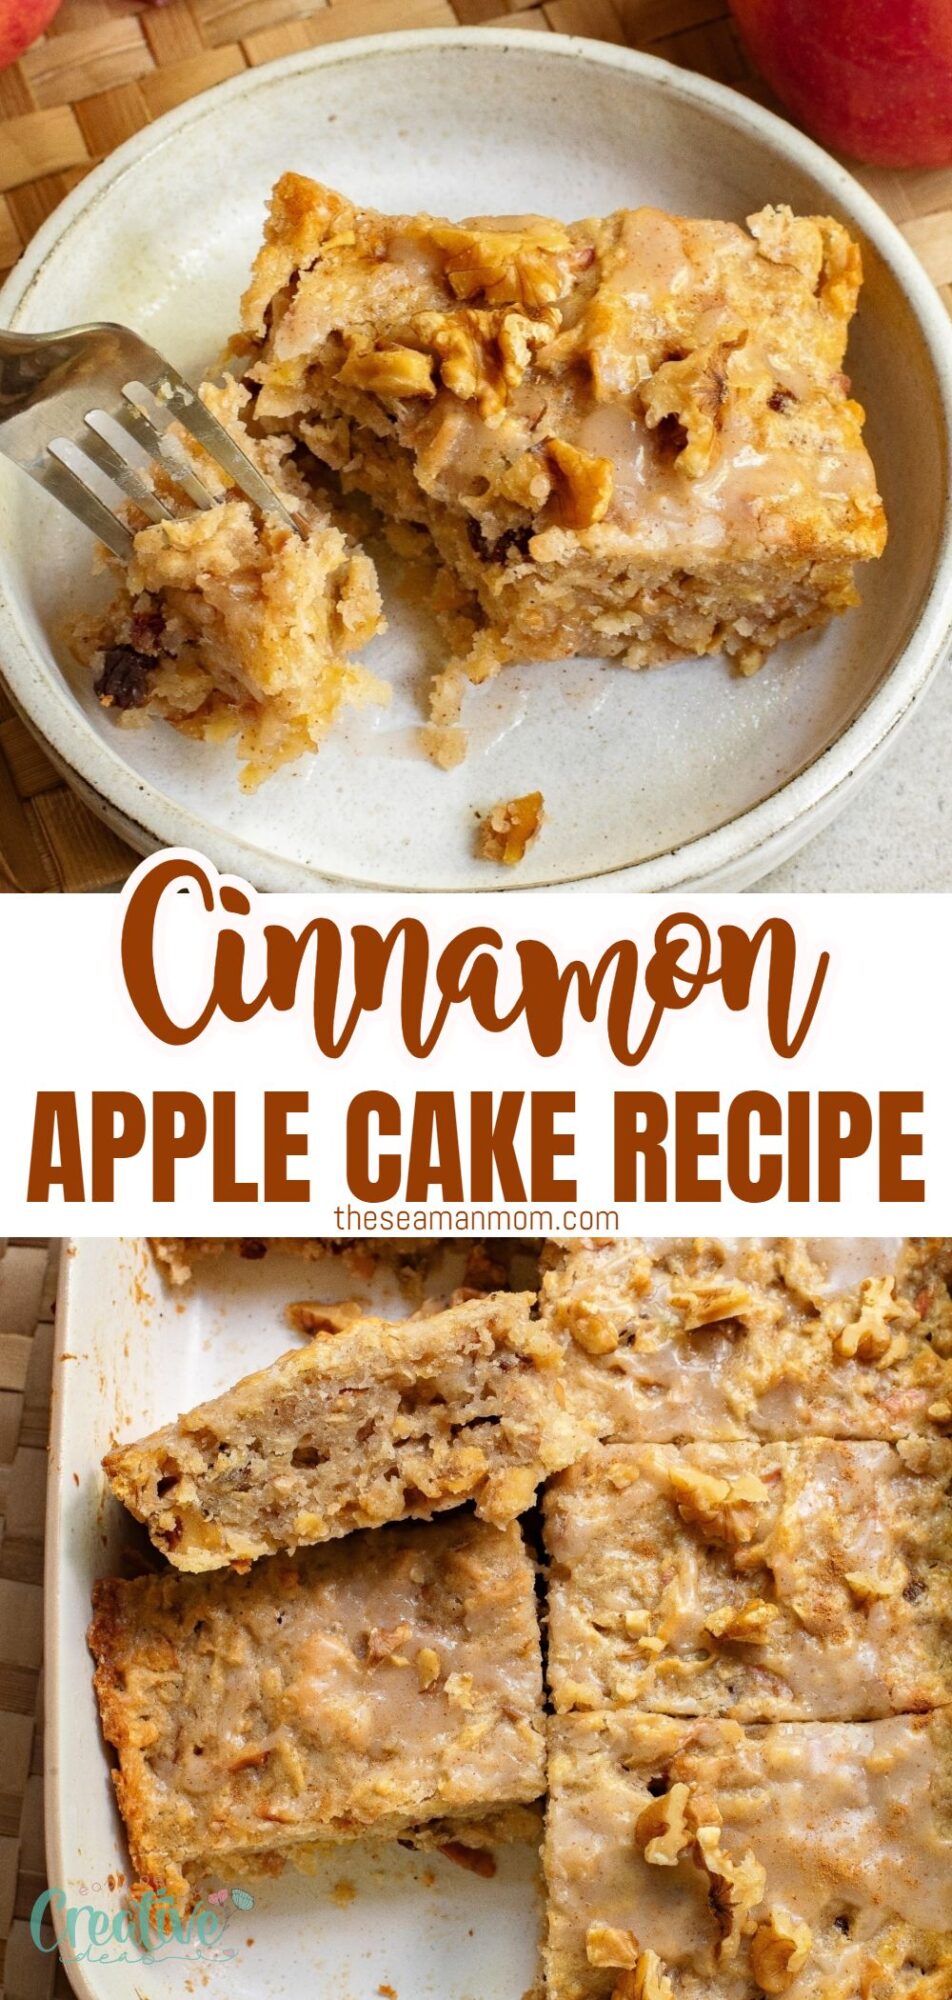 A delicious cinnamon apple cake with a golden crust and a sweet, moist center. Perfect for fall baking!